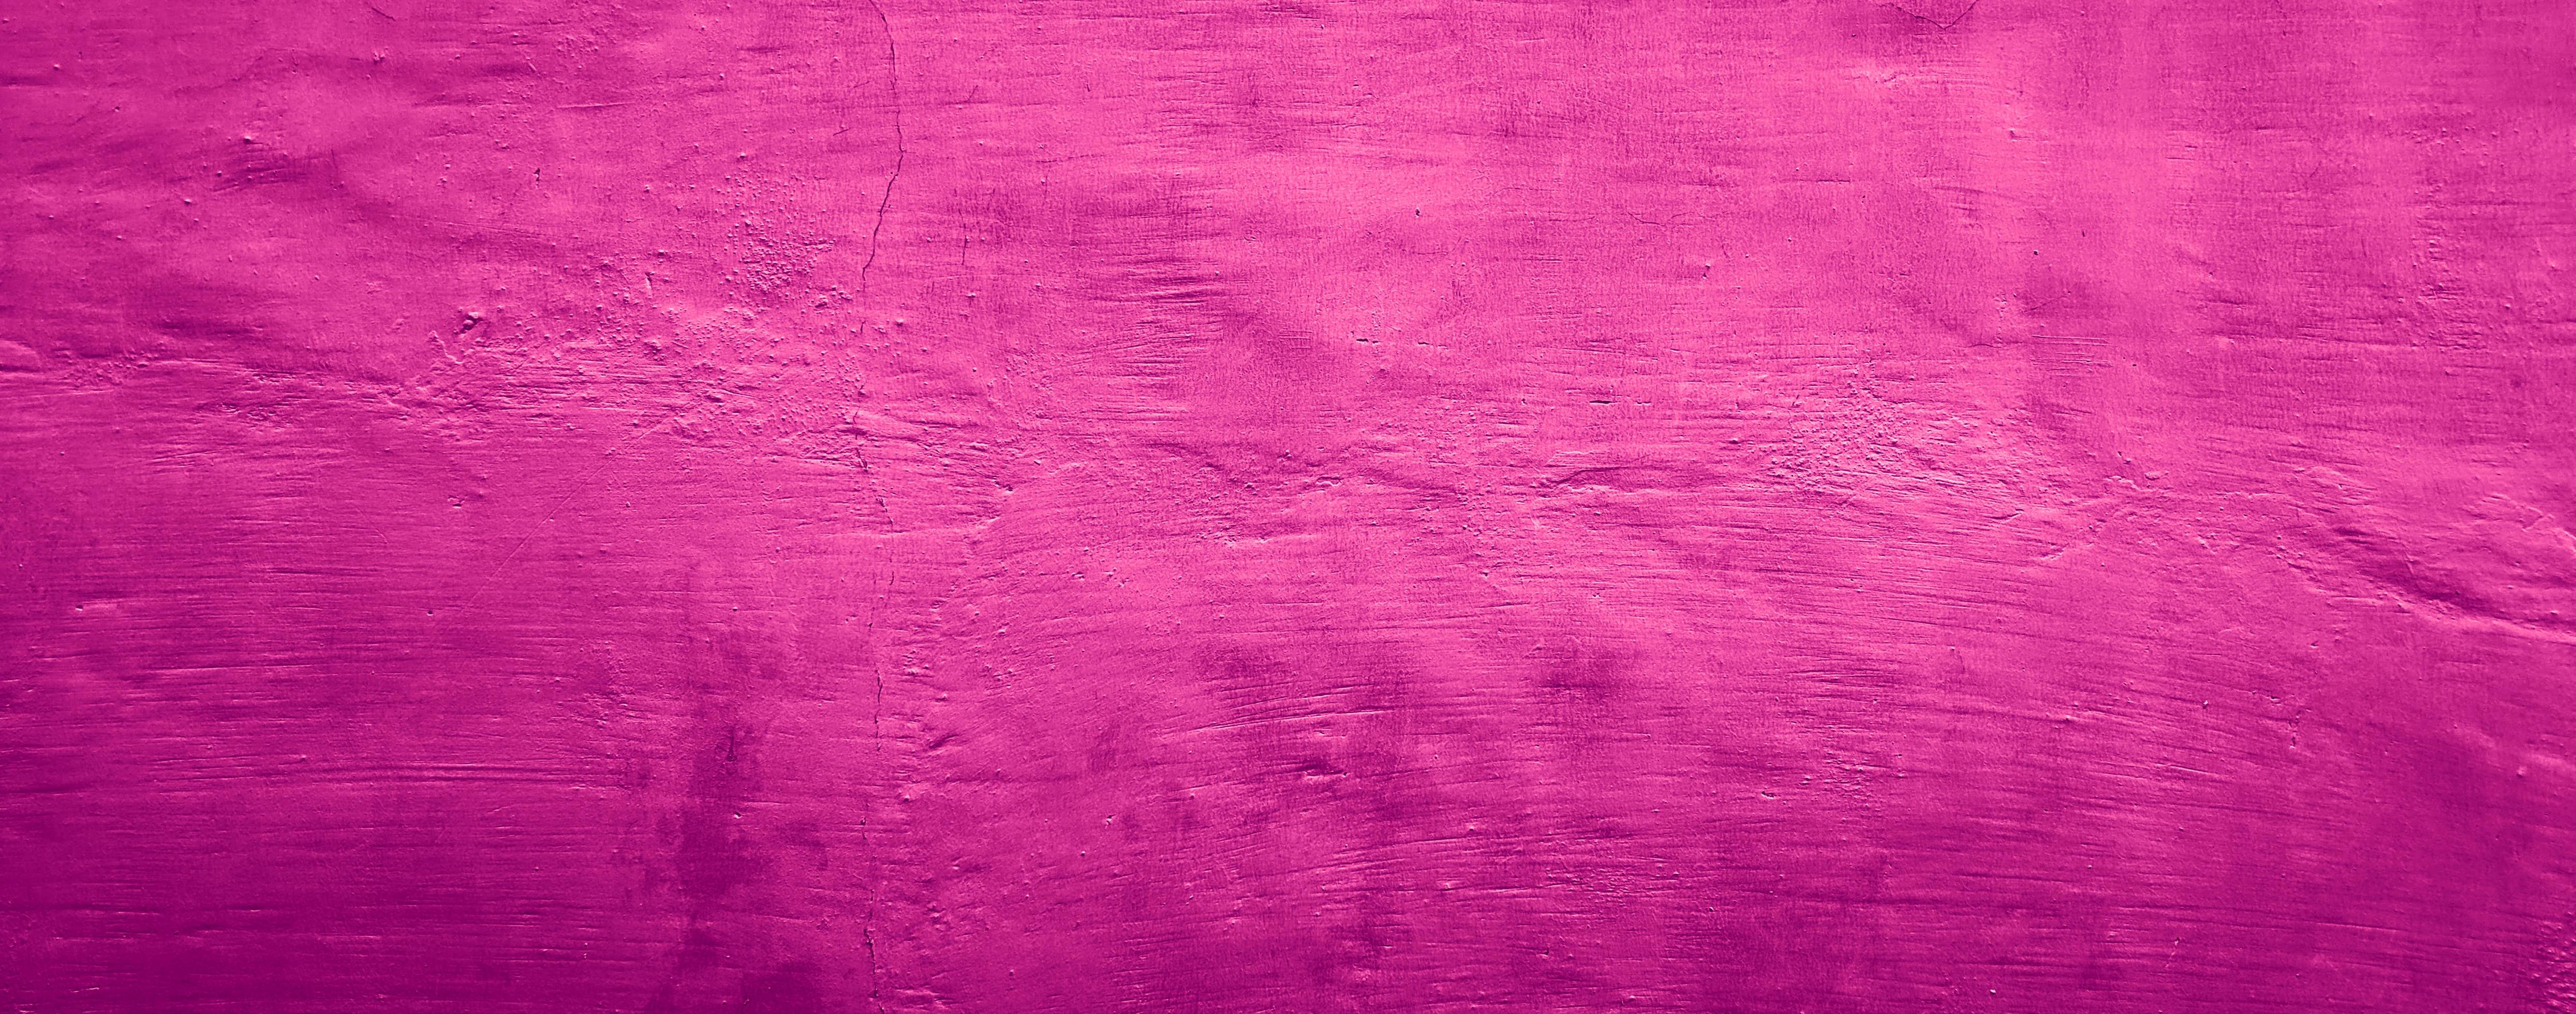 pink purple solid color abstract concrete wall texture background 4838341  Stock Photo at Vecteezy